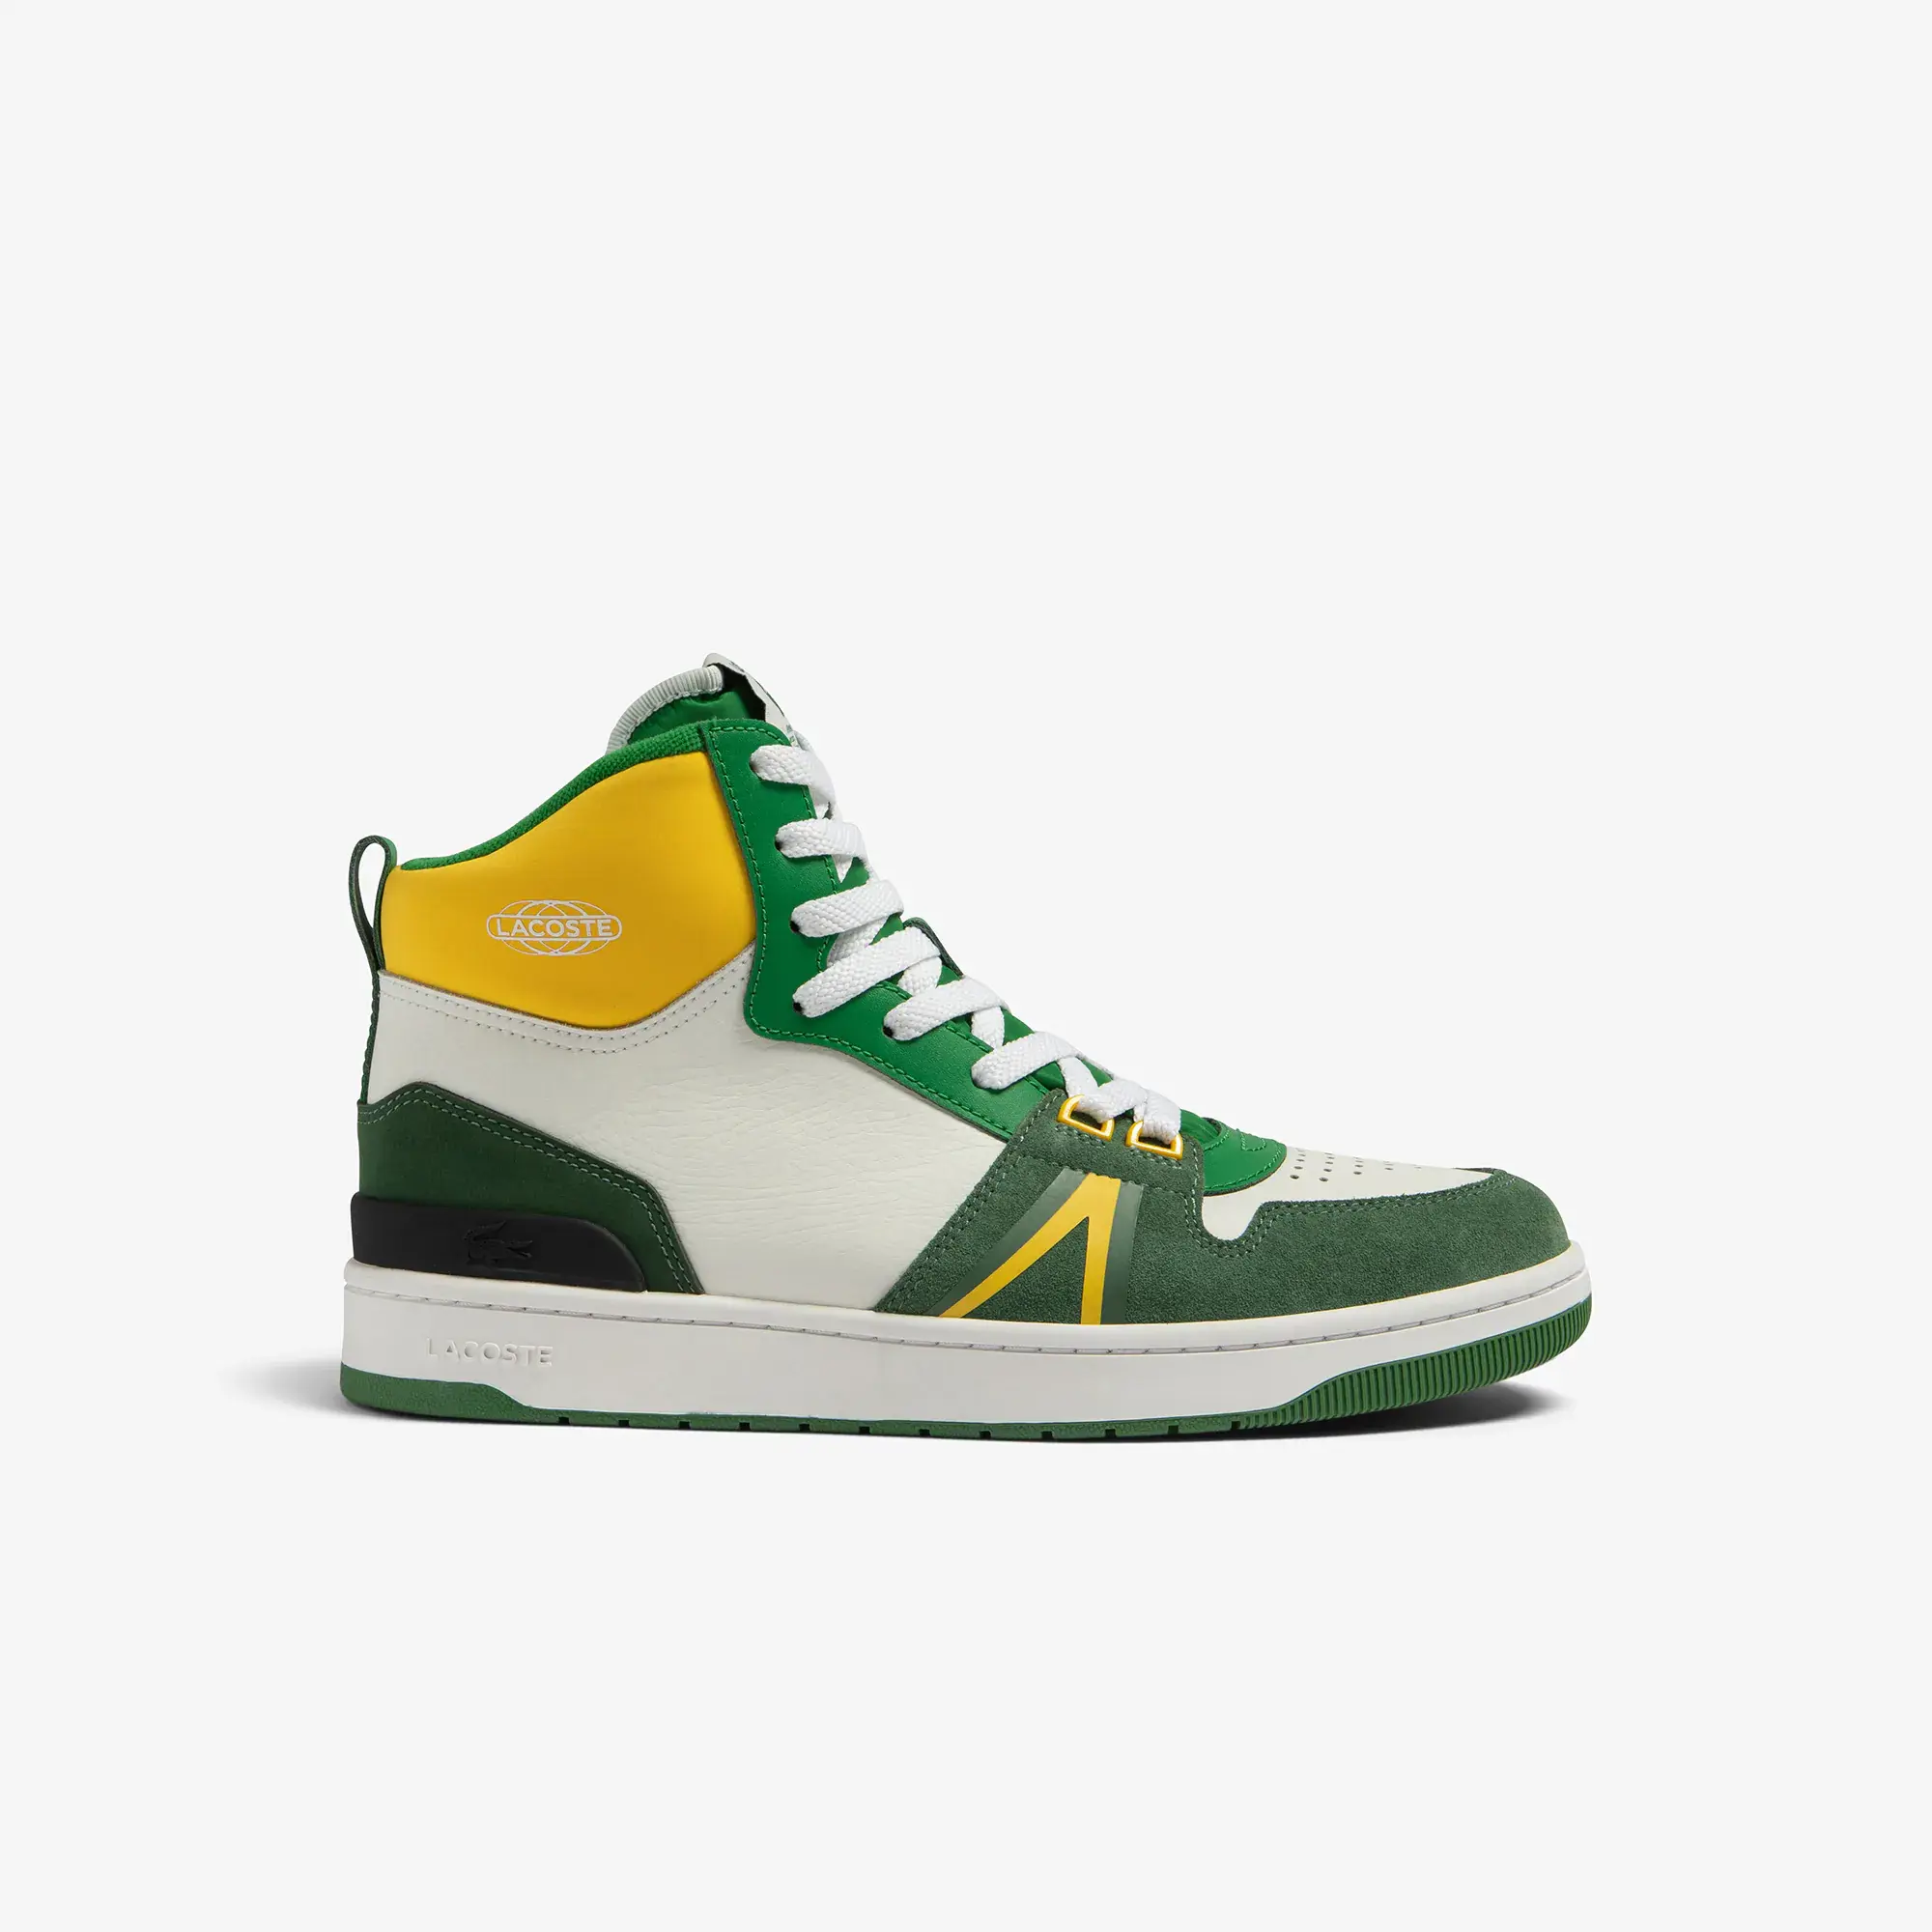 Lacoste Men's L001 Leather Colorblock High-Top Sneakers. 1